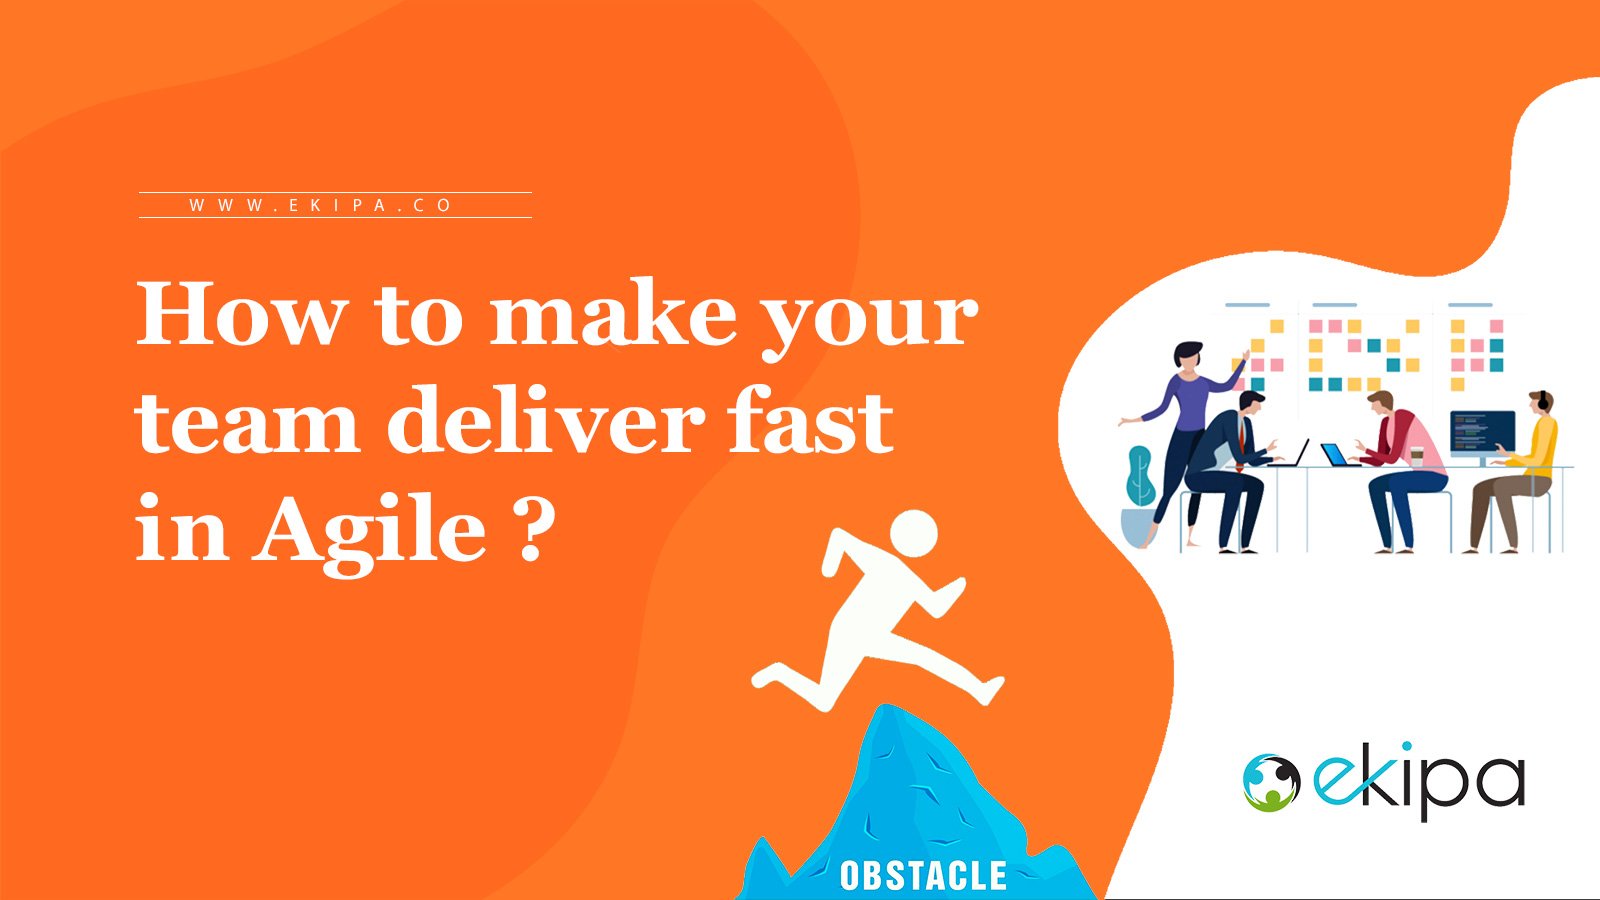 How to deliver fast with agile